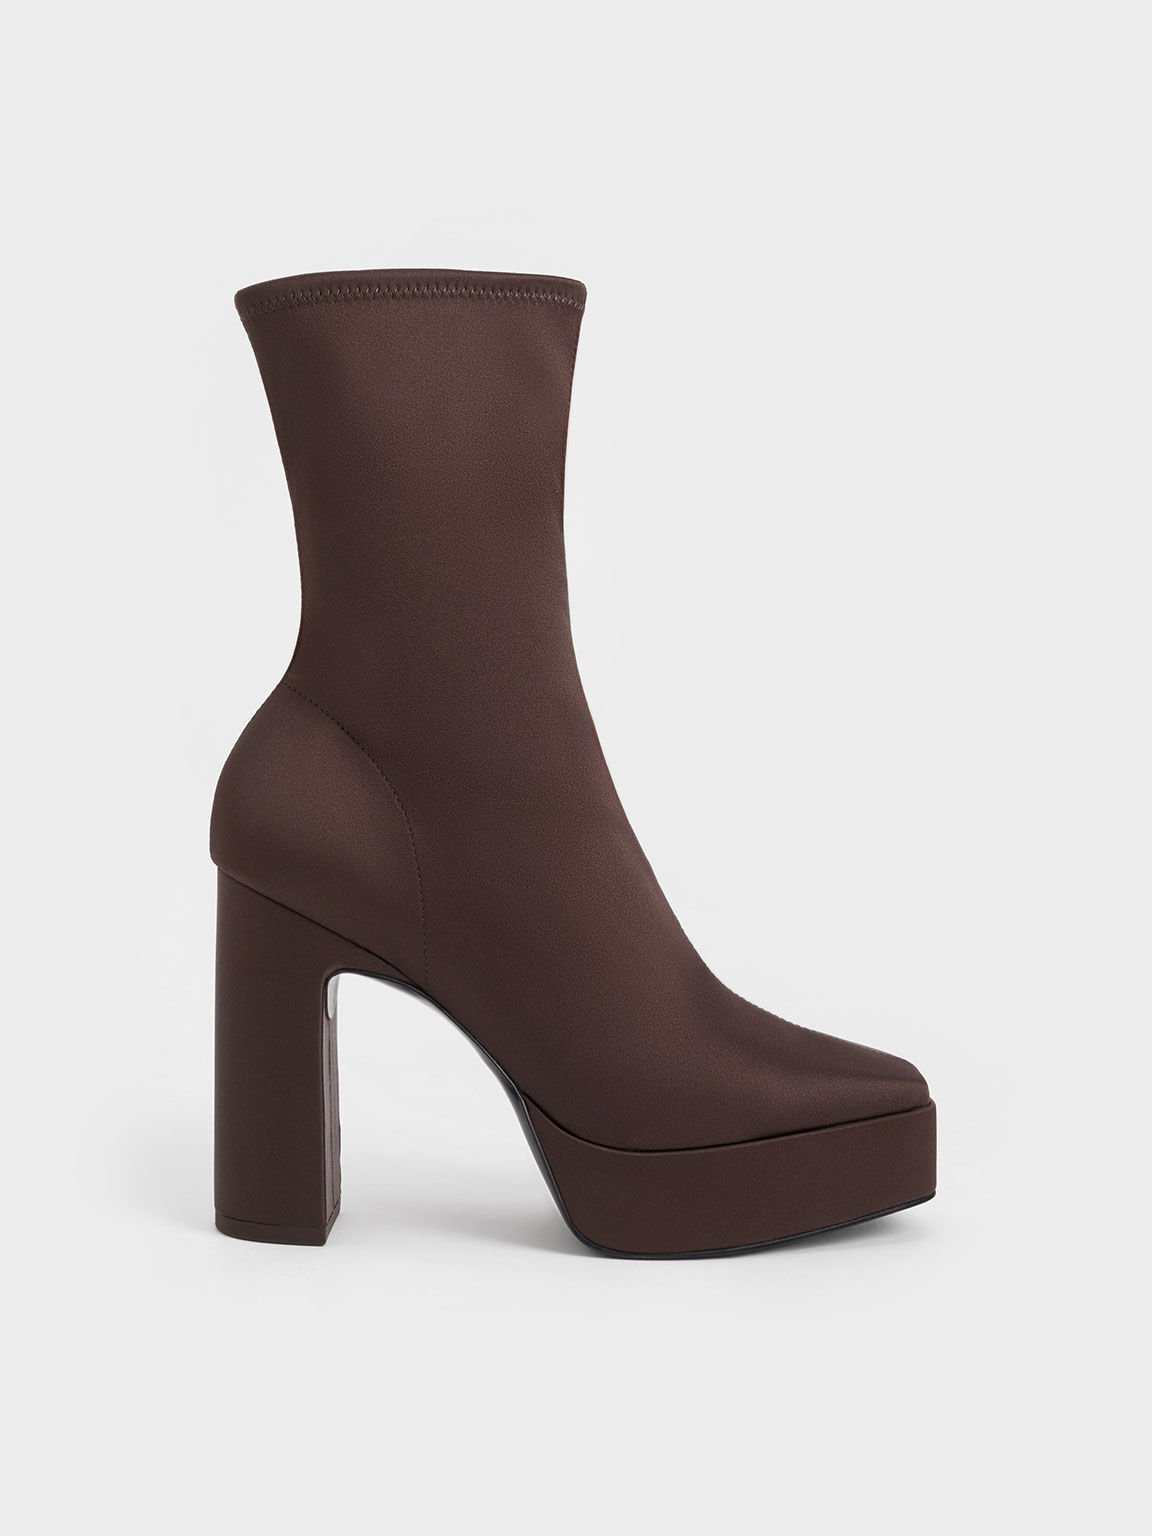 Zara Rubberized Low Heel Lace-up Ankle Boots | 18 Cute Shoes You're Going  to Want to Wear For Spring, Summer, and Beyond | POPSUGAR Fashion UK Photo  10